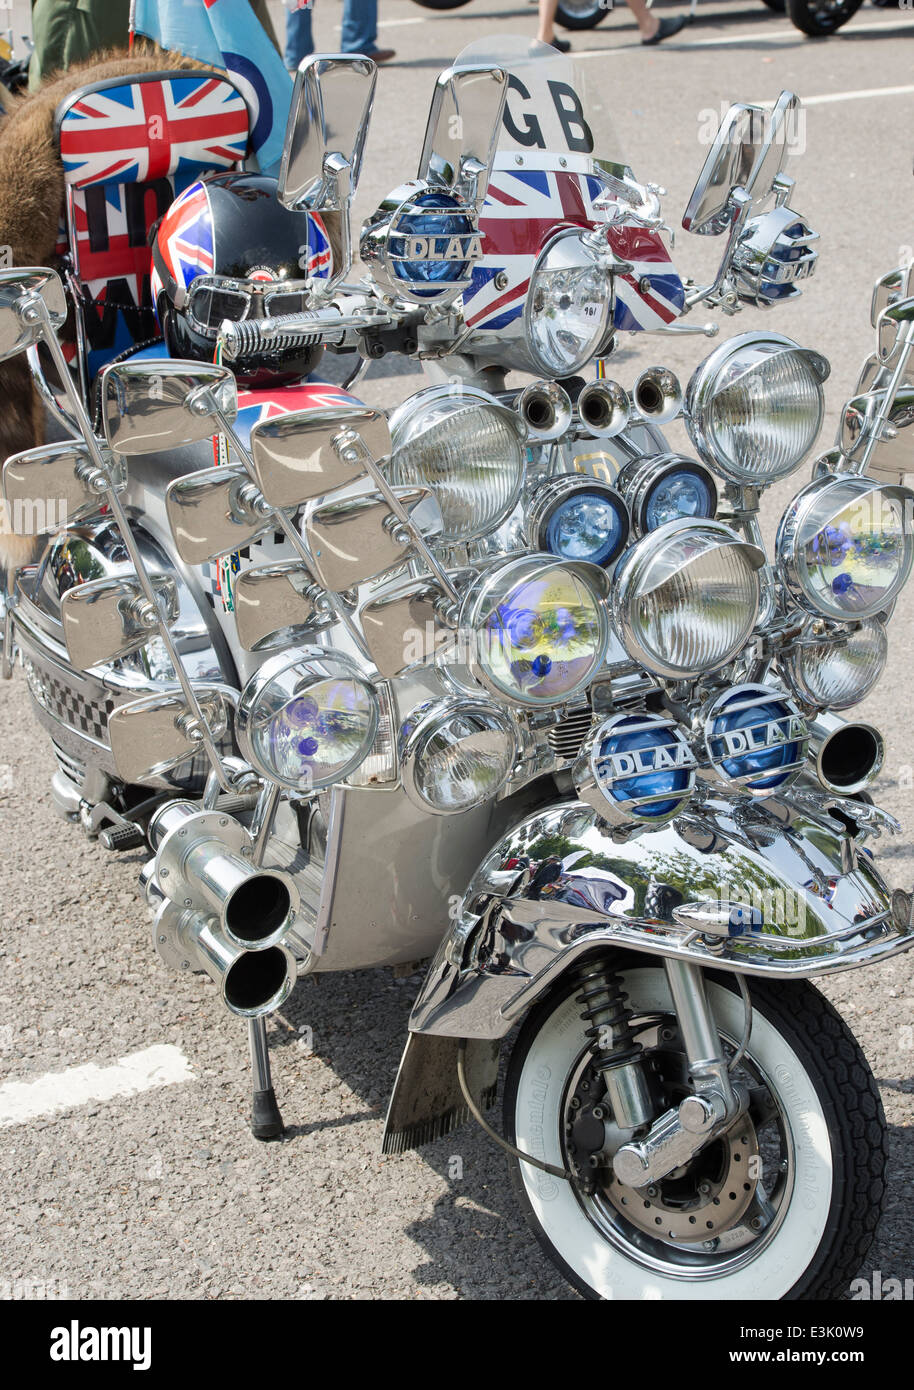 Mods vespa custom scooter with mirrors, lights, logos and union jack decal Stock Photo